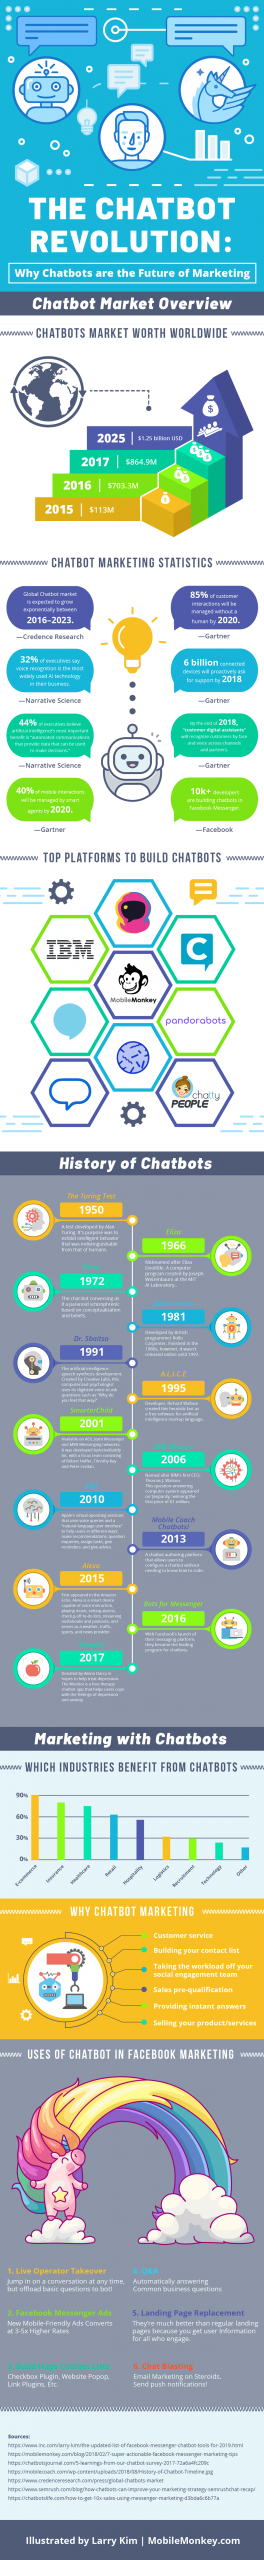 The Chatbot Revolution: Why Chatbots are the Future of Marketing